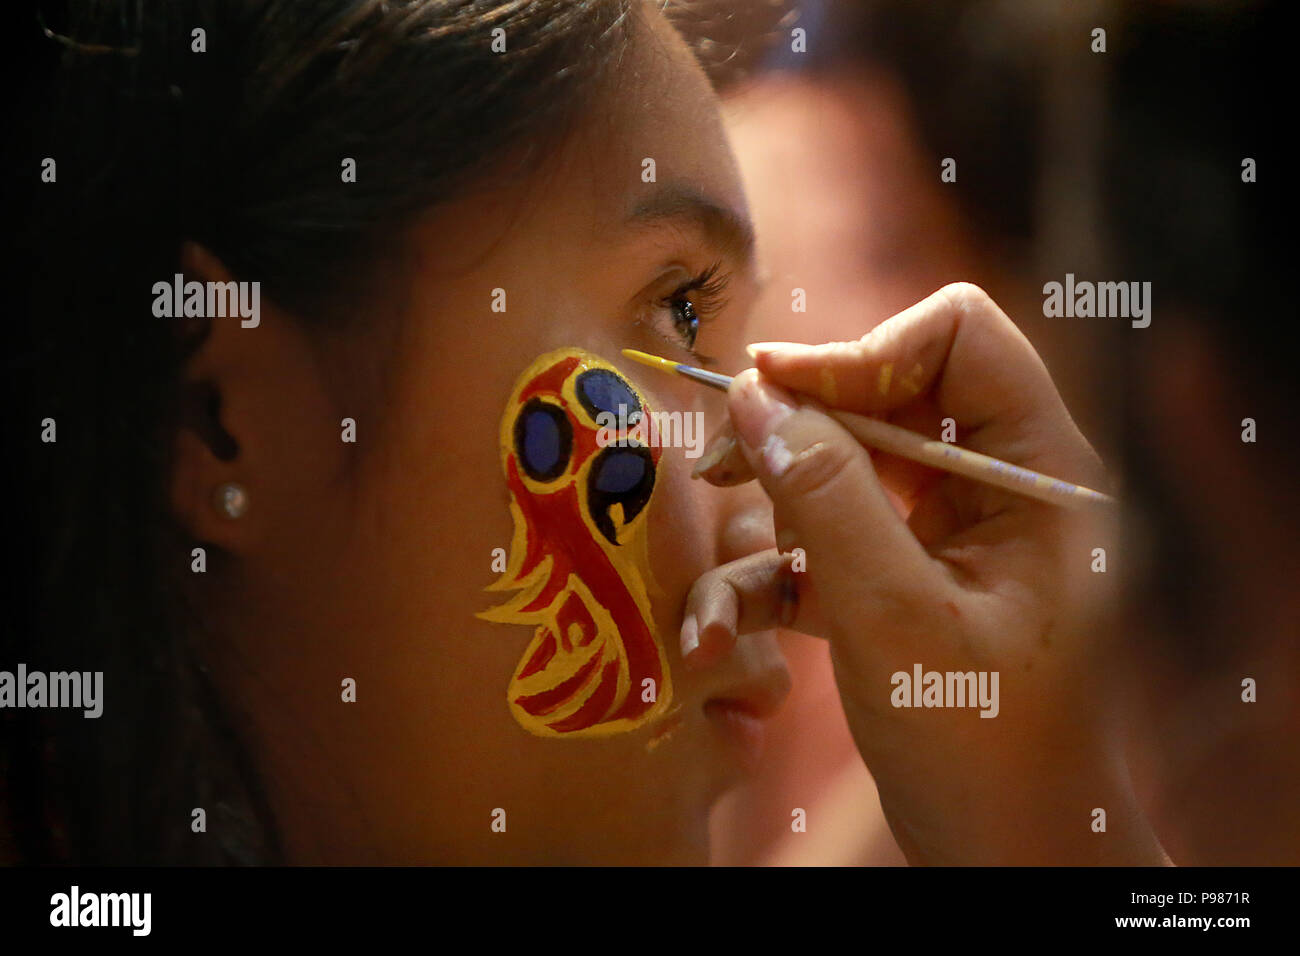 Pasig City, Philippines. 15th July, 2018. A fan has her face painted with the 2018 World Cup logo during a live viewing party of the 2018 FIFA World Cup final between France and Croatia at a bar in Pasig City, the Philippines, July 15, 2018. Credit: Rouelle Umali/Xinhua/Alamy Live News Stock Photo